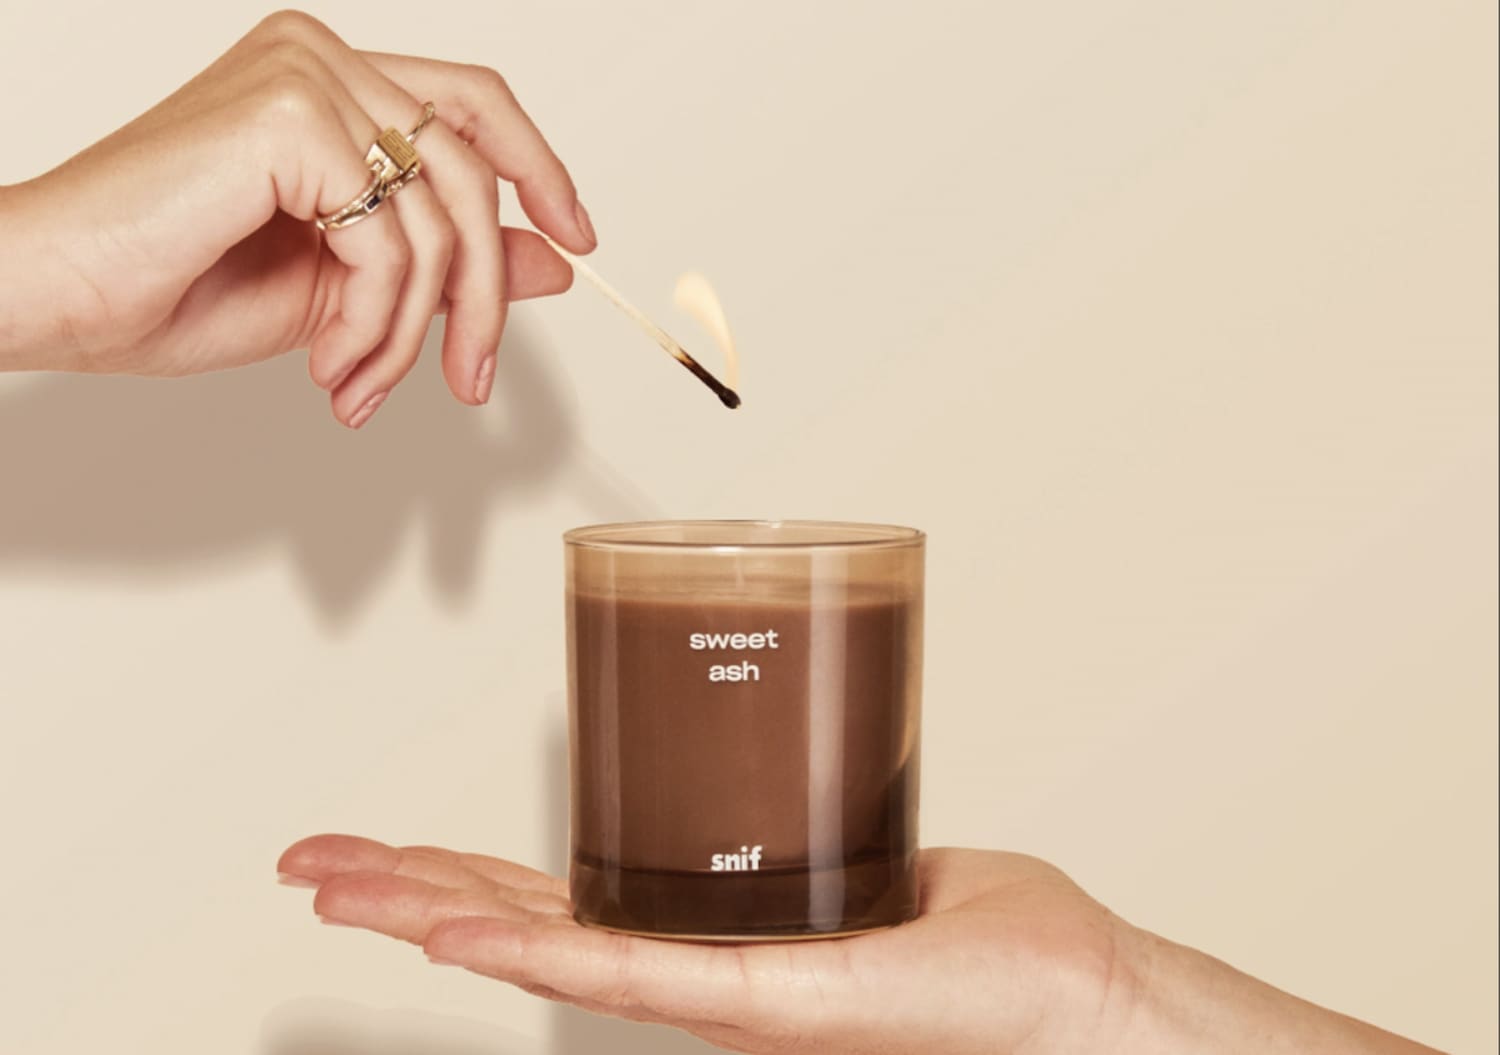 This New Candle Is Based on a Best-Selling Fragrance That Once Had a Waitlist of Thousands